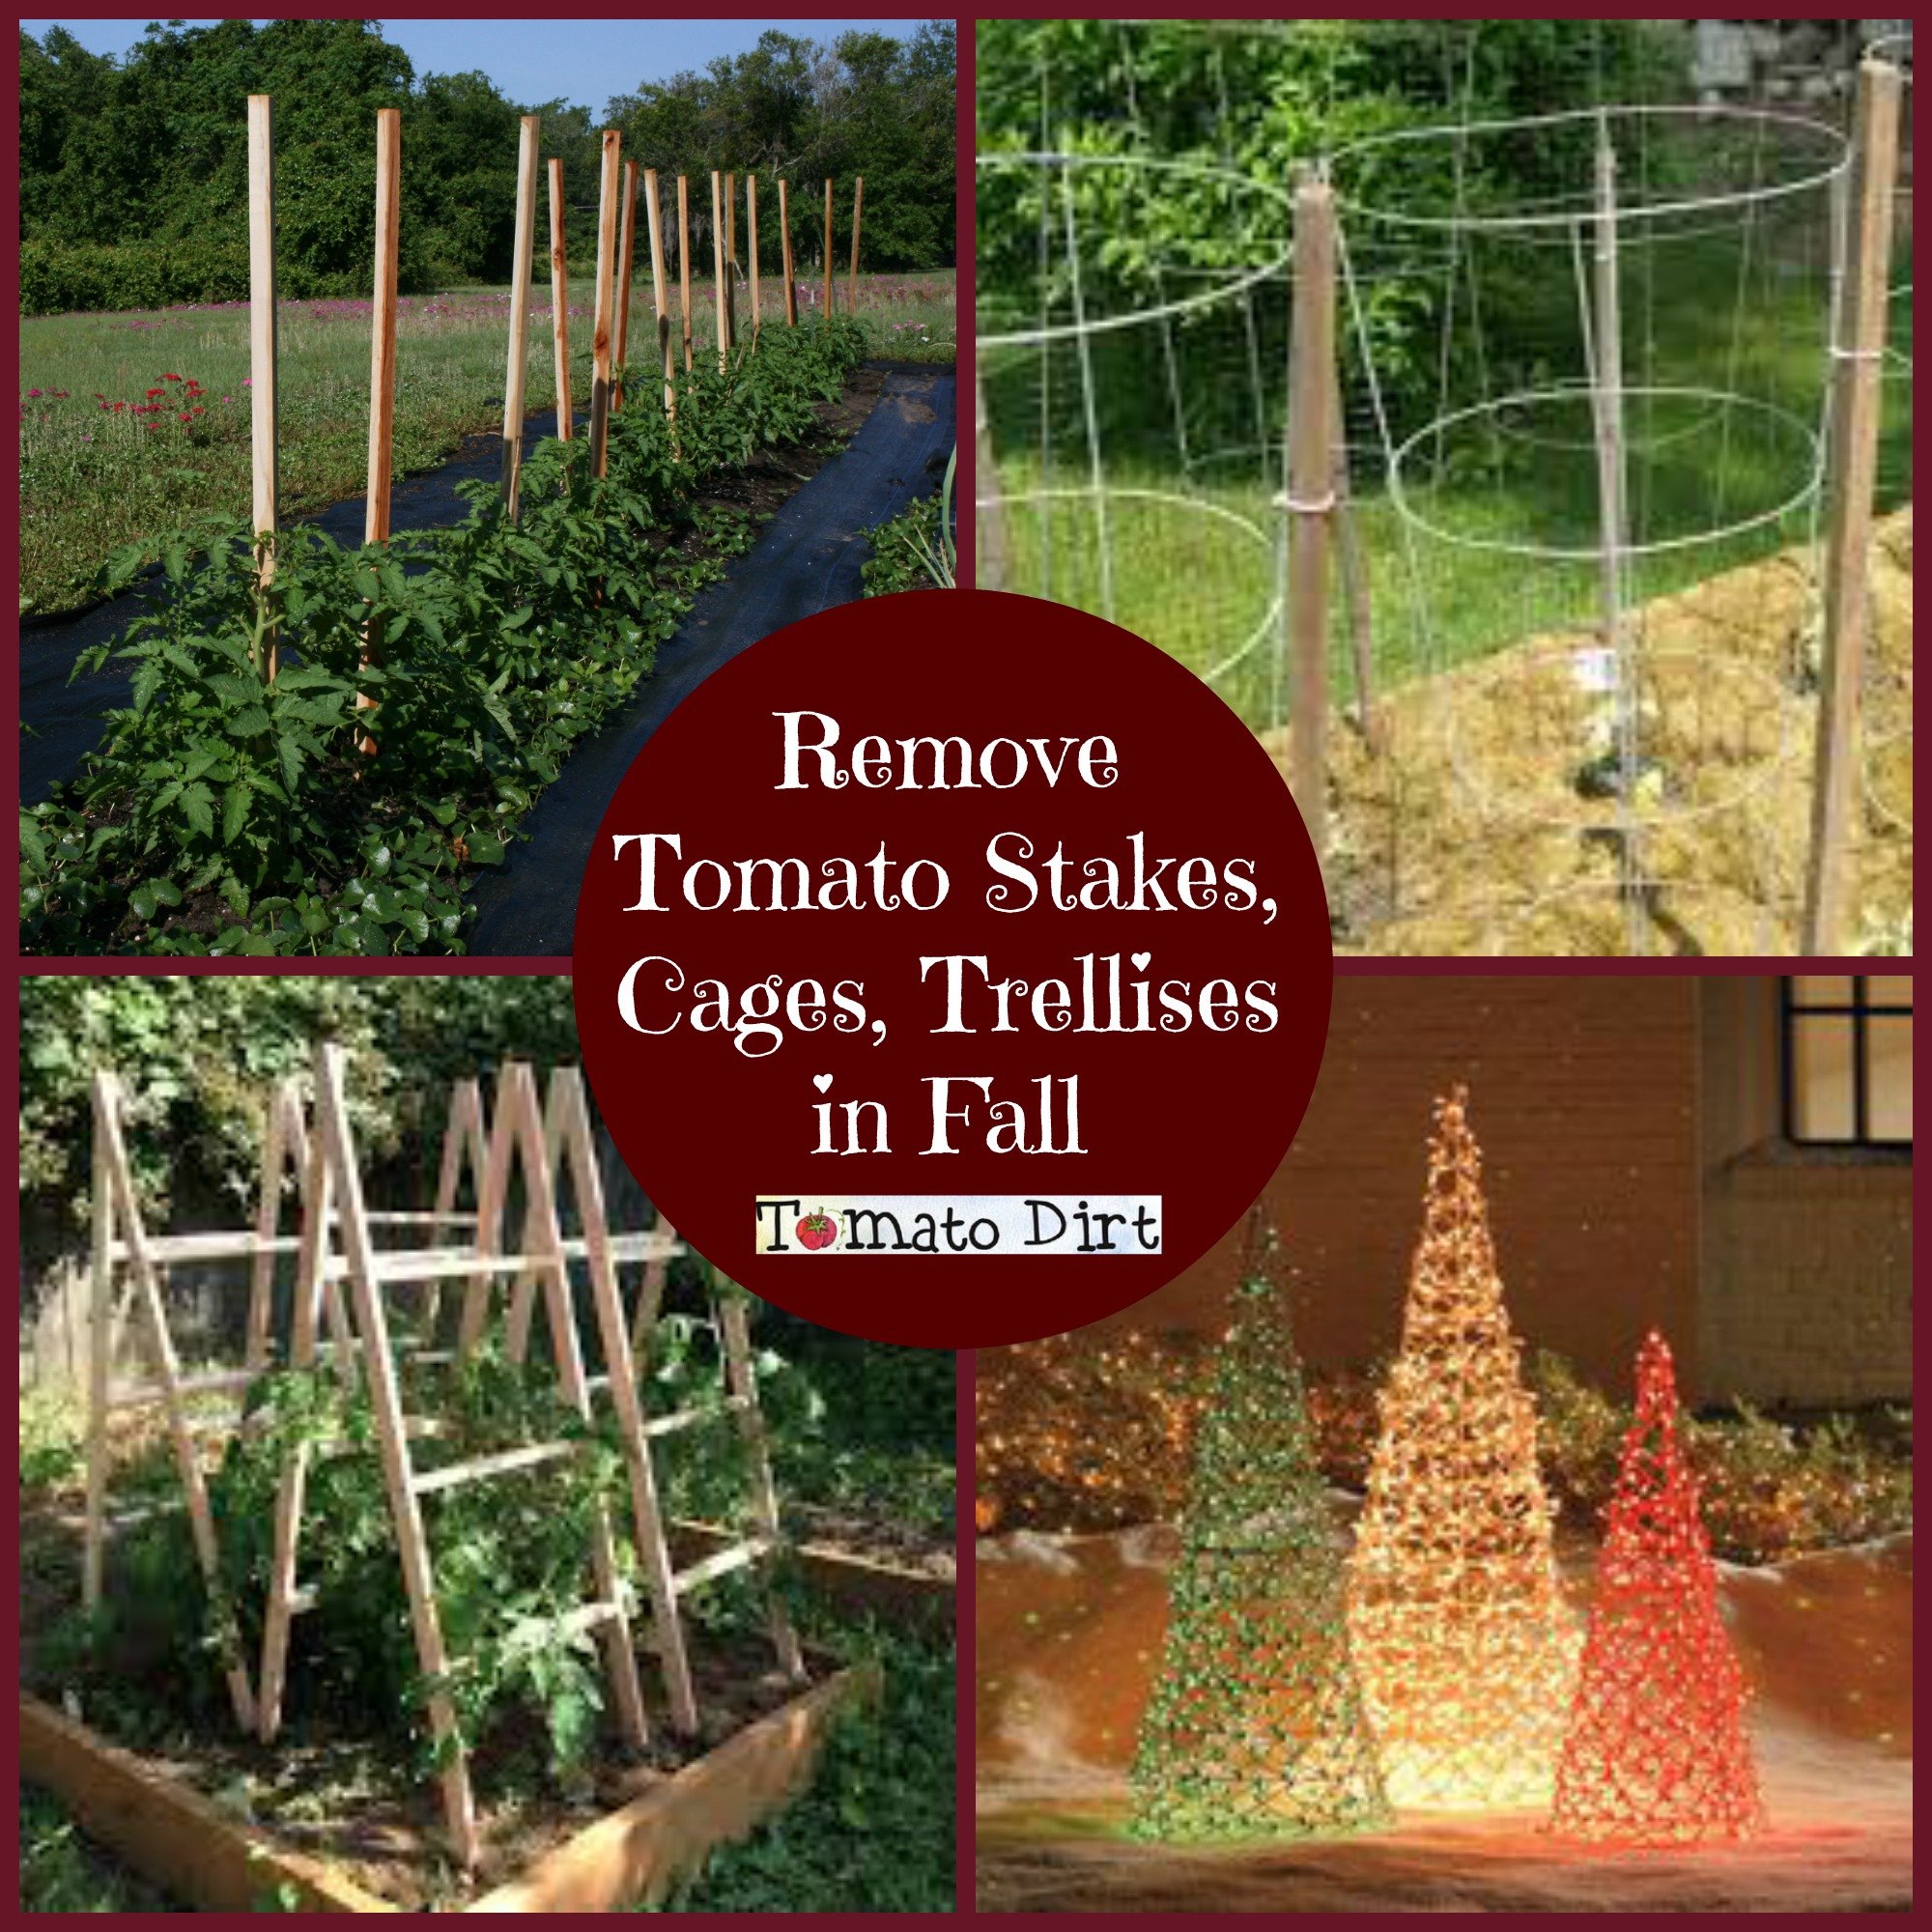 Remove Tomato Stakes, Cages, Trellises in Fall from Tomato Dirt